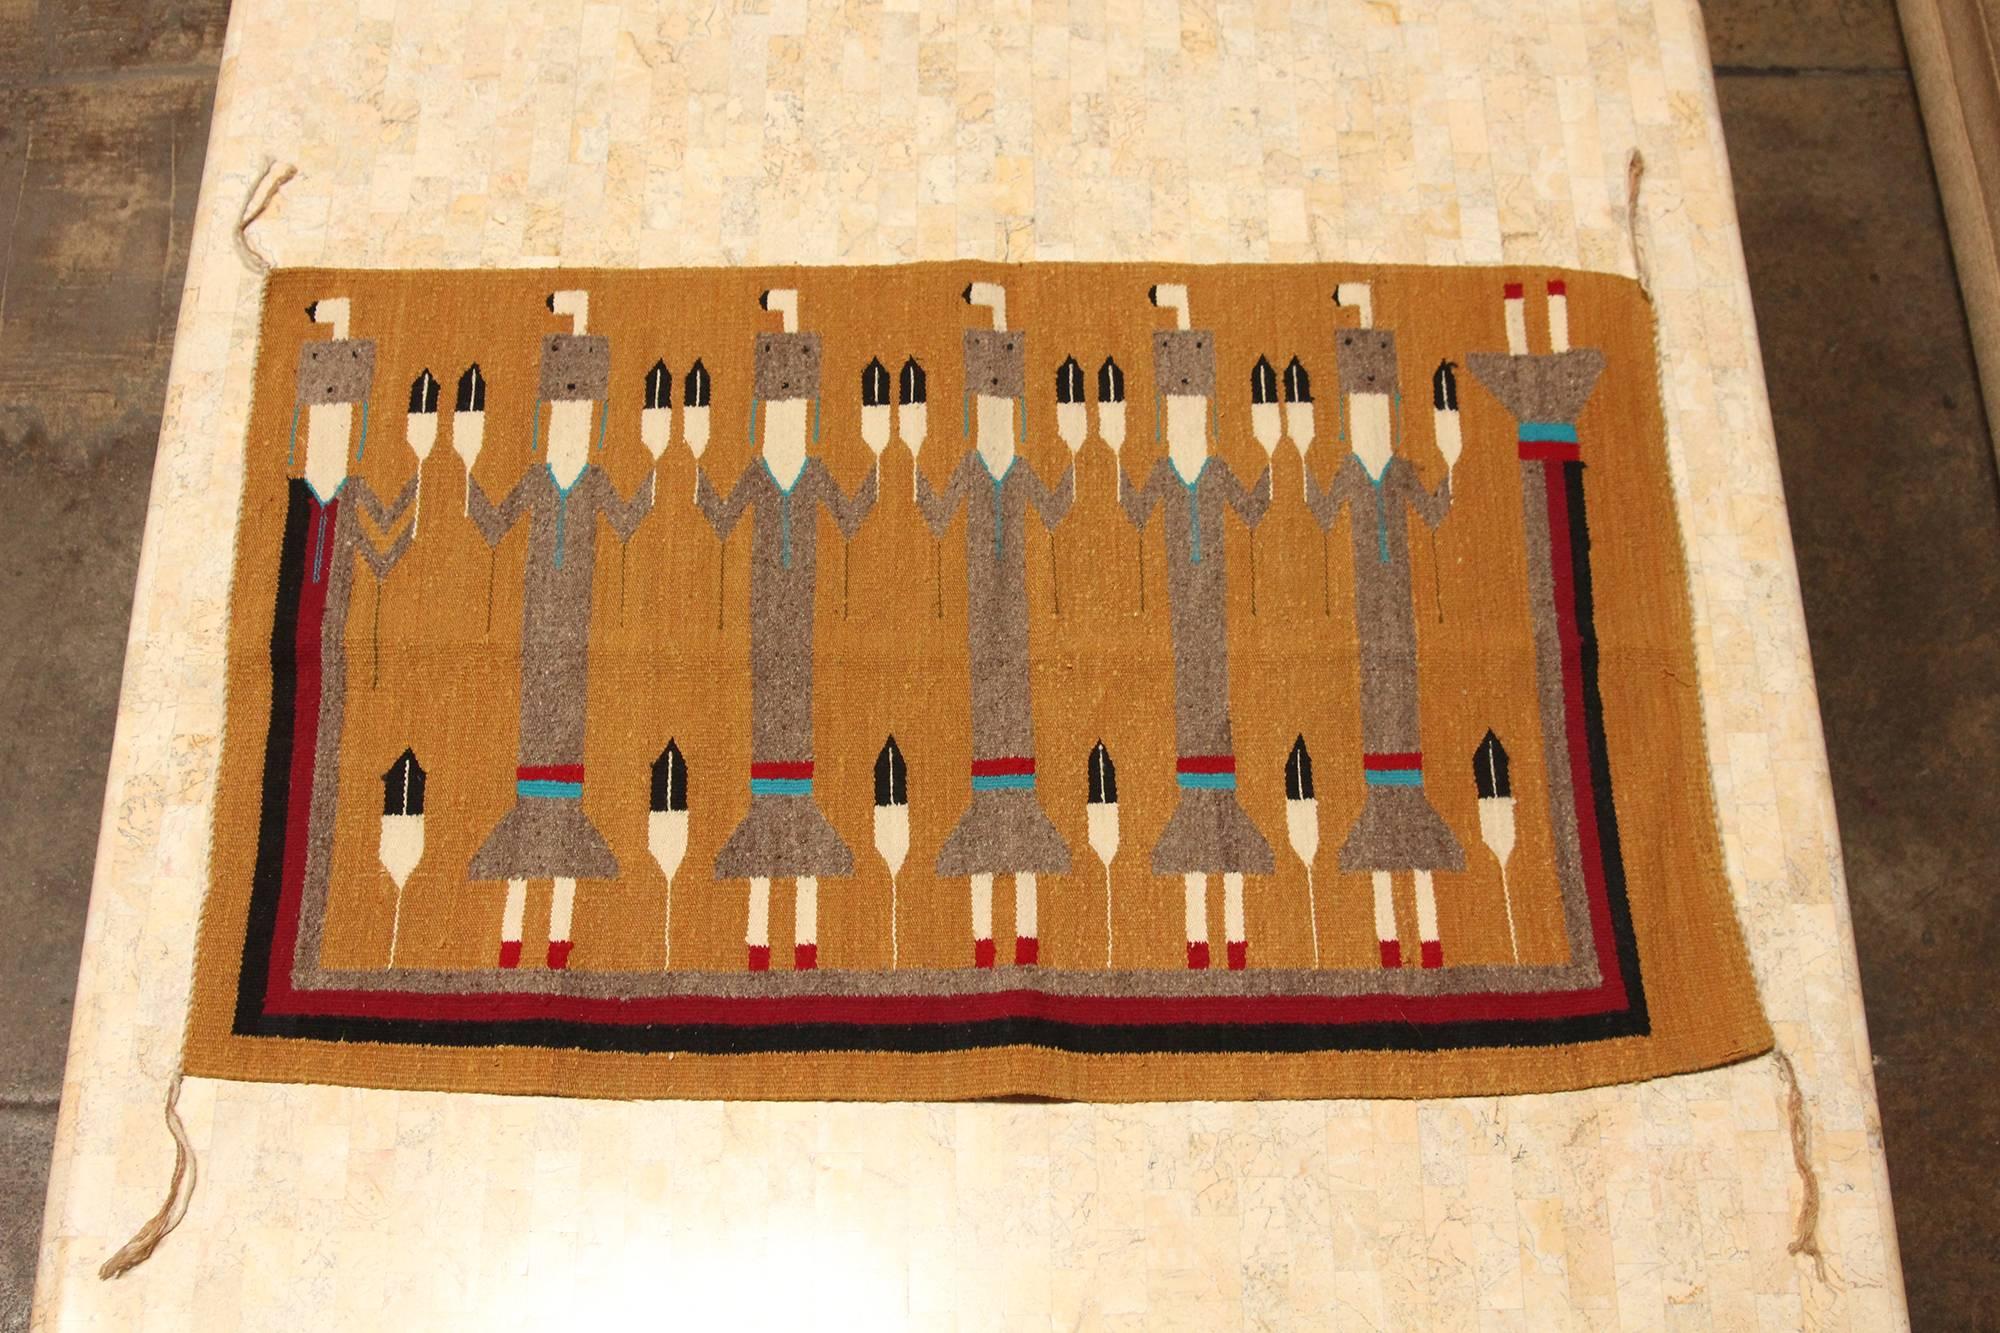 A pictorial weaving with a unique composition featuring three Yei (Yeibichai) figures holding one feather in each hand. According to Navajo belief, a Yei is a supernatural being or a holy one with healing powers. Yei can be male or female and are